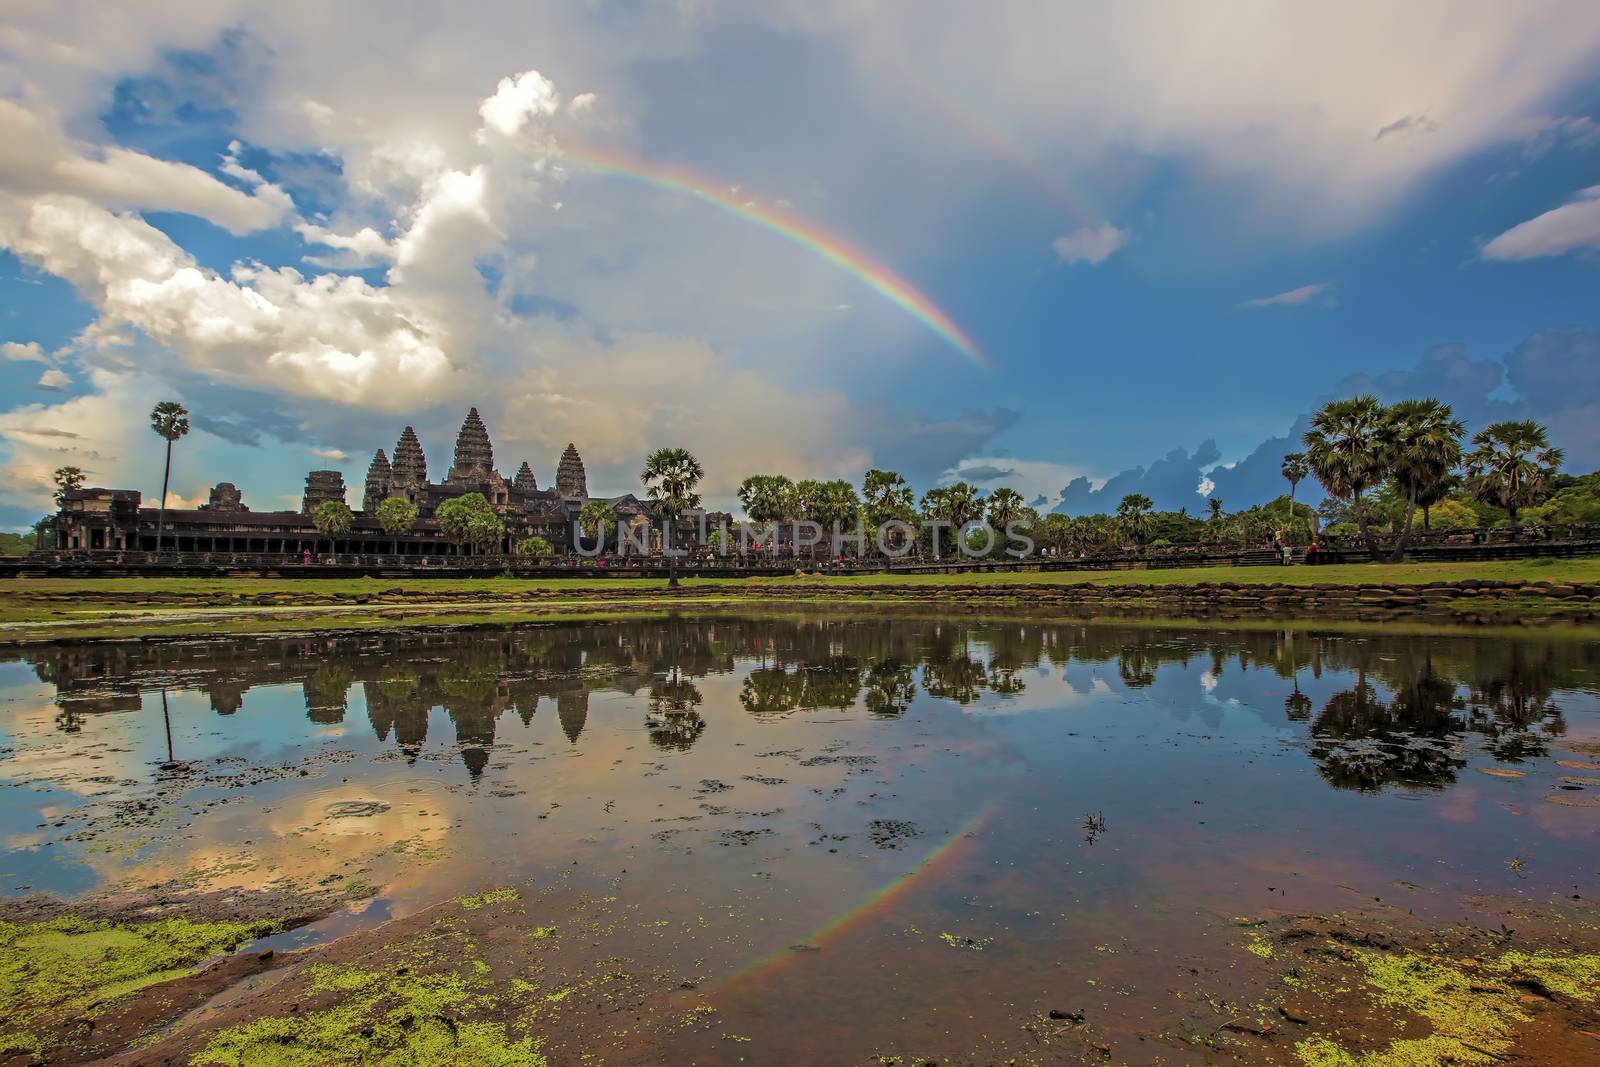 Sunset over the Angkor Wat temple in Cambodia